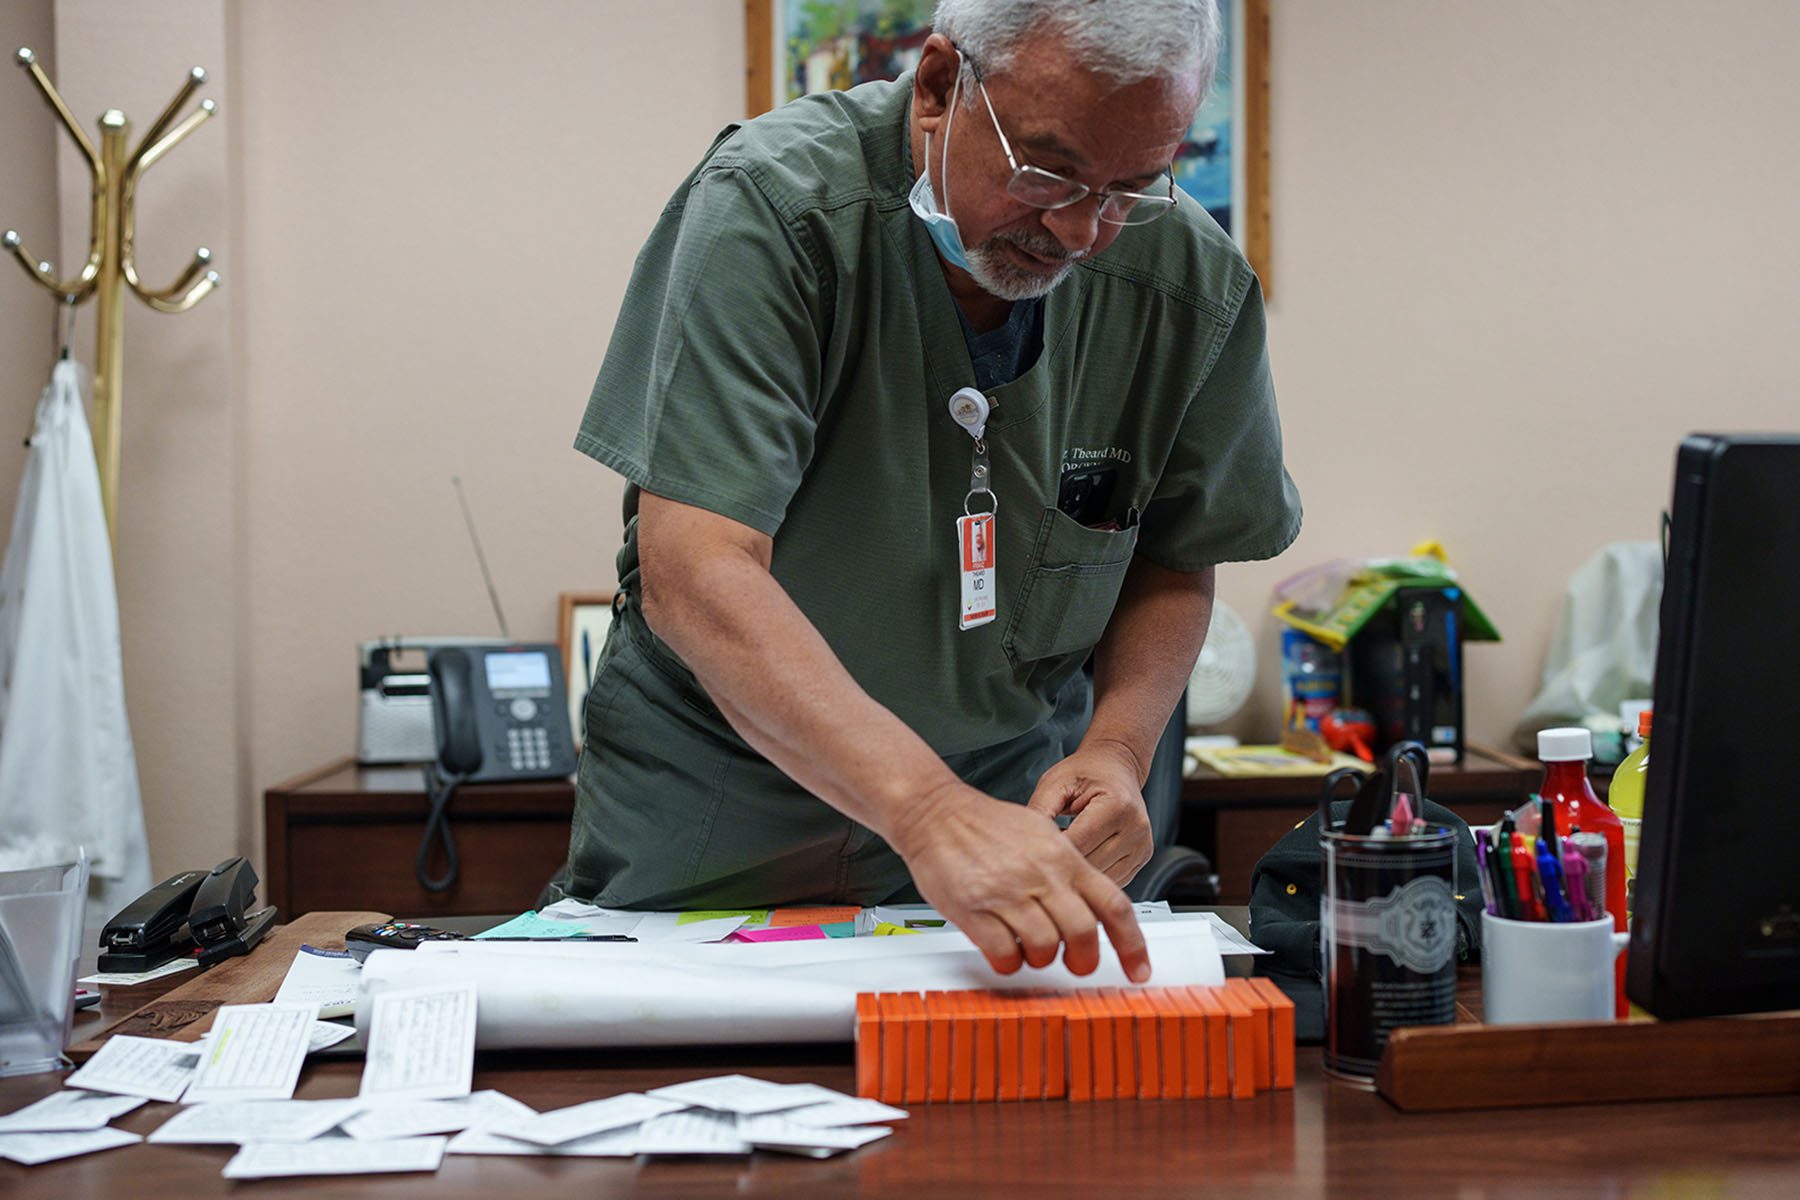 Dr. Franz Theard in his office, preparing doses for Mifestrone on his desk.